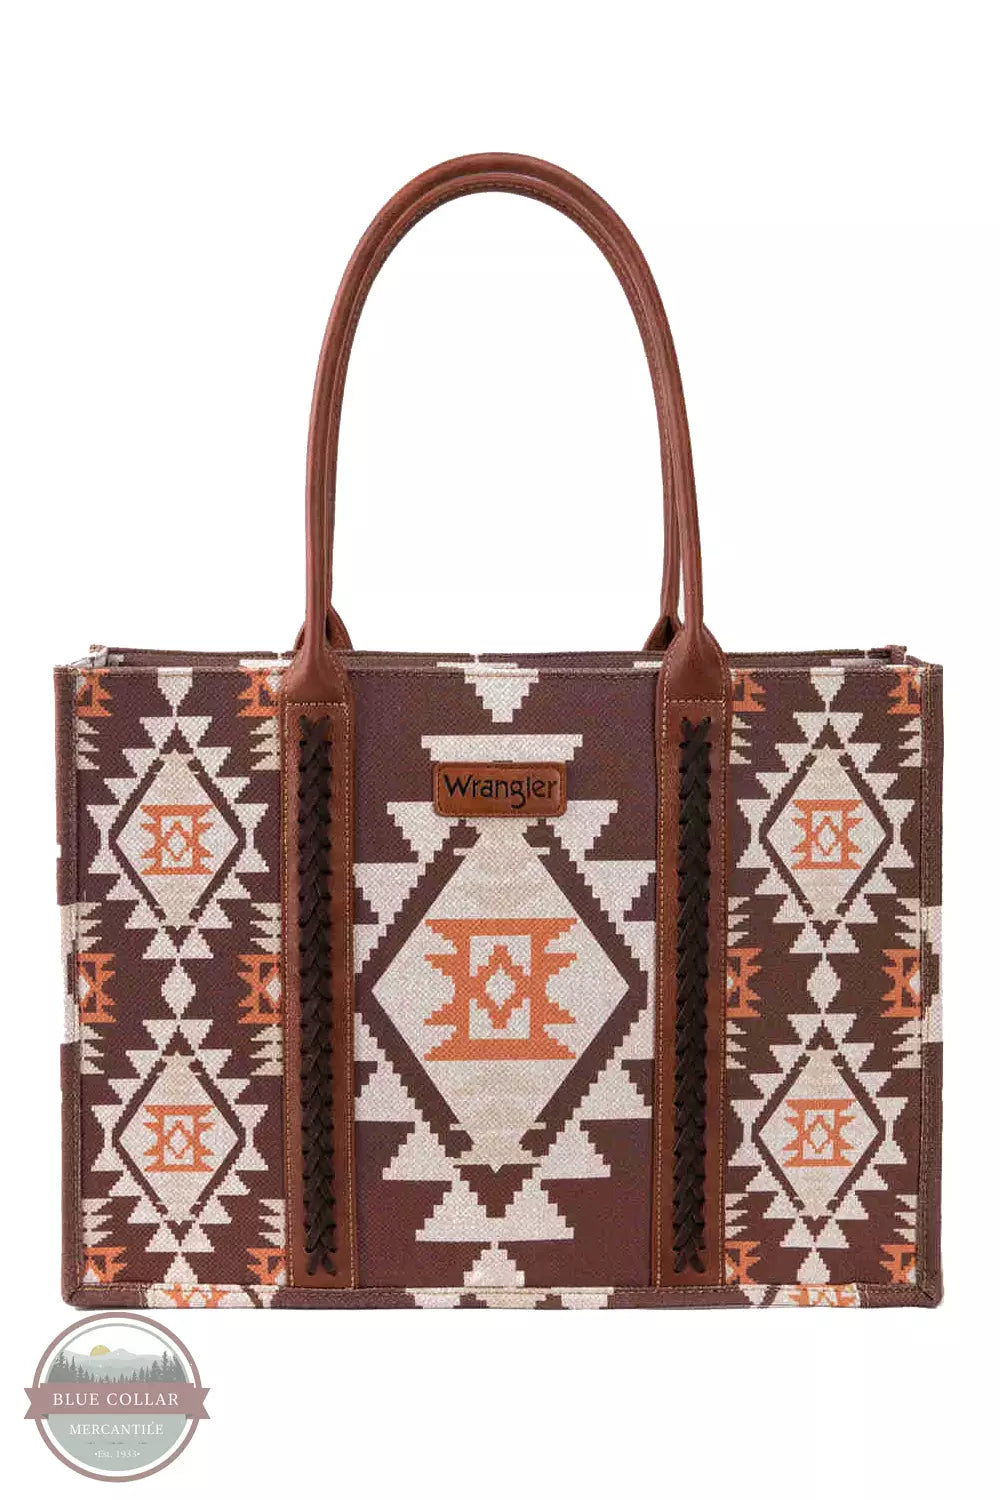 Wrangler WG2203-8119 Southwestern Print Canvas Wide Tote Bag Coffee Front View